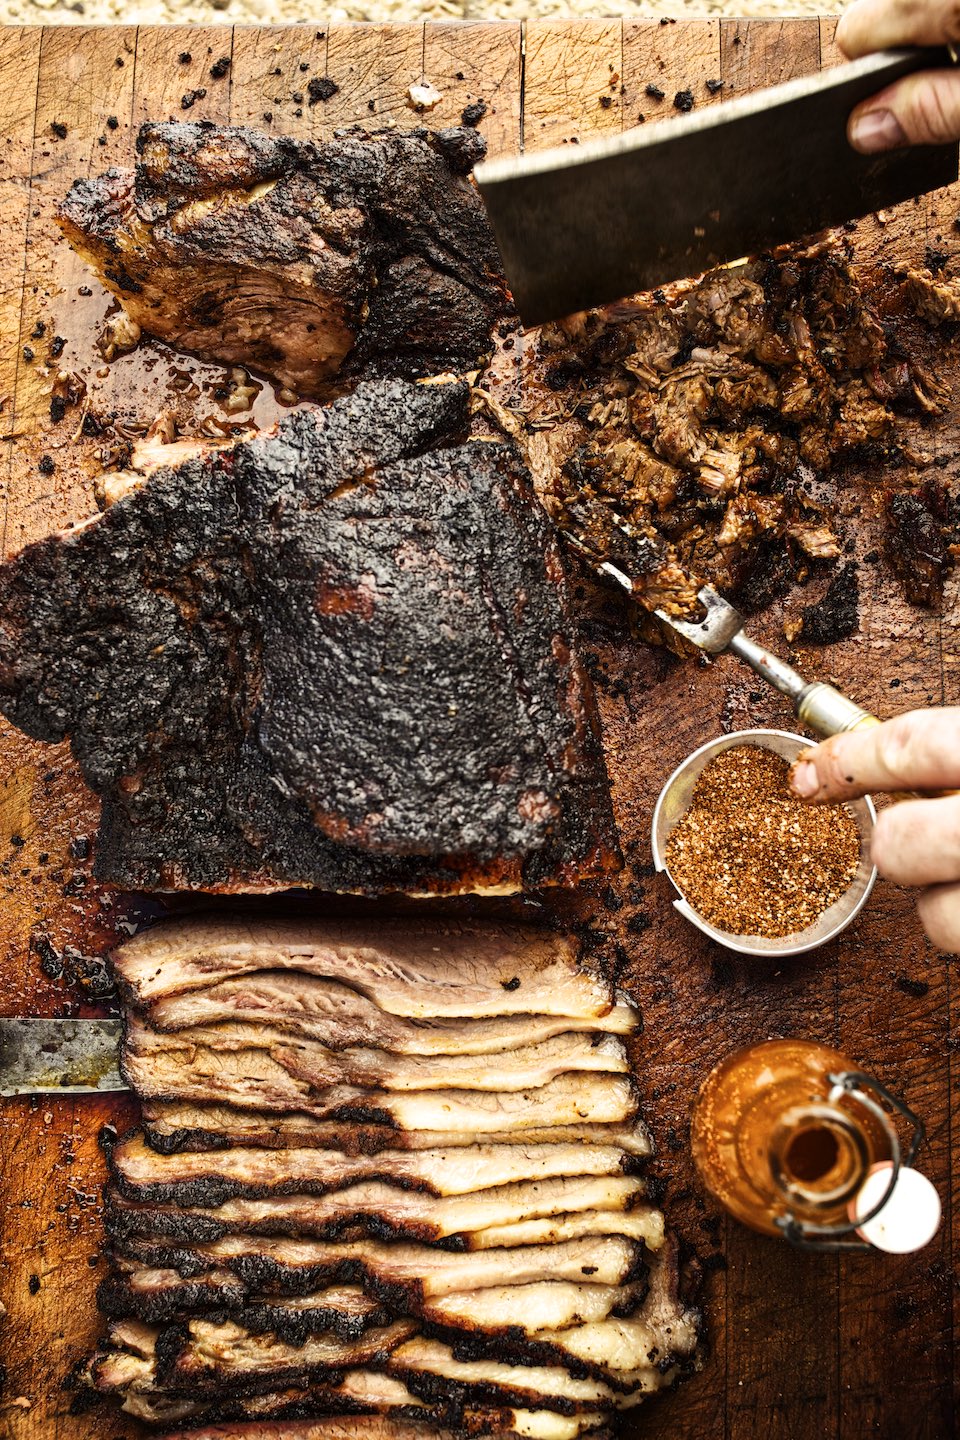 Jody Horton Photography - Sliced brisket and sauces on a wood cutting board.